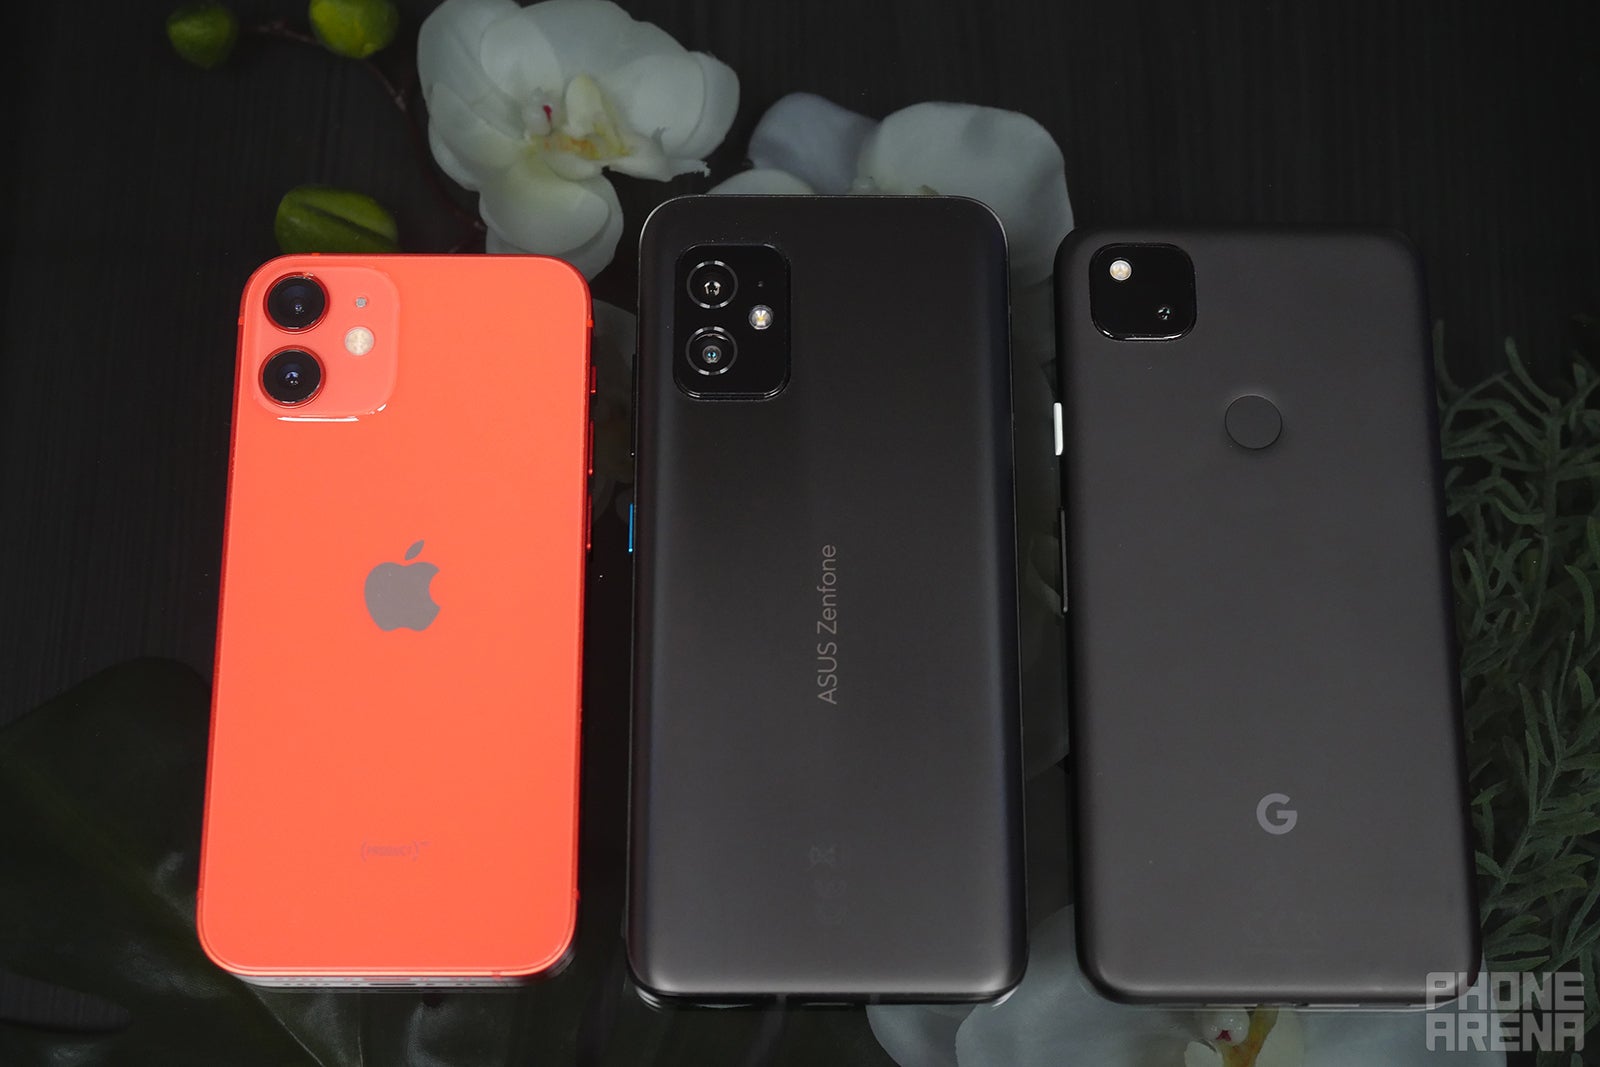 iPhone 12 mini, Zenfone 8, Pixel 4a - Asus Zenfone 8 review: Just the right size